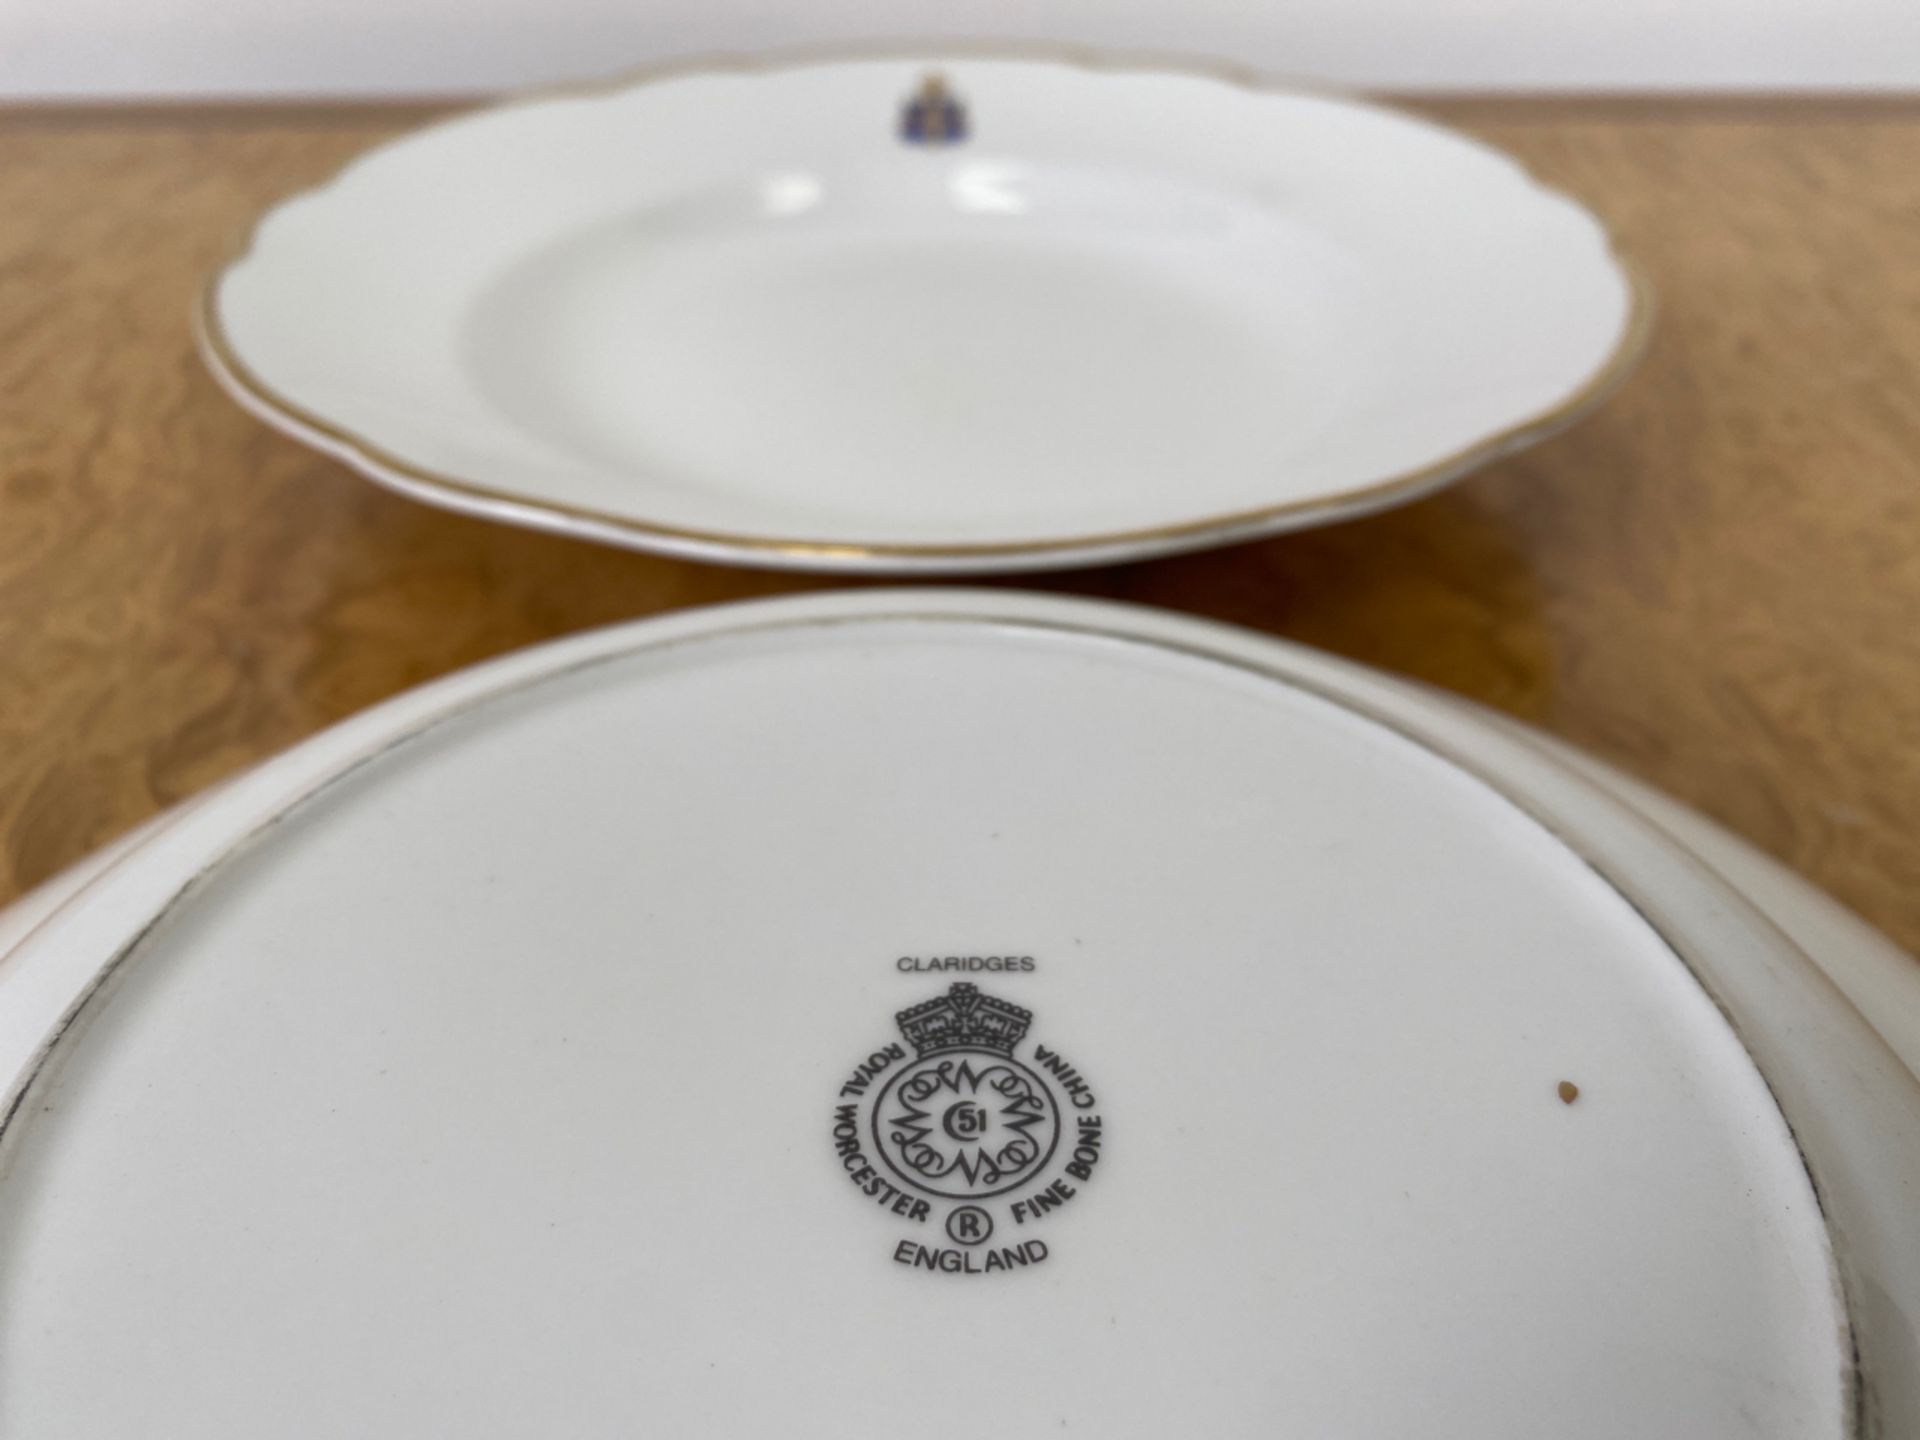 Set of Crested Crockery for Claridge's by Chommette 1884 - Image 41 of 44